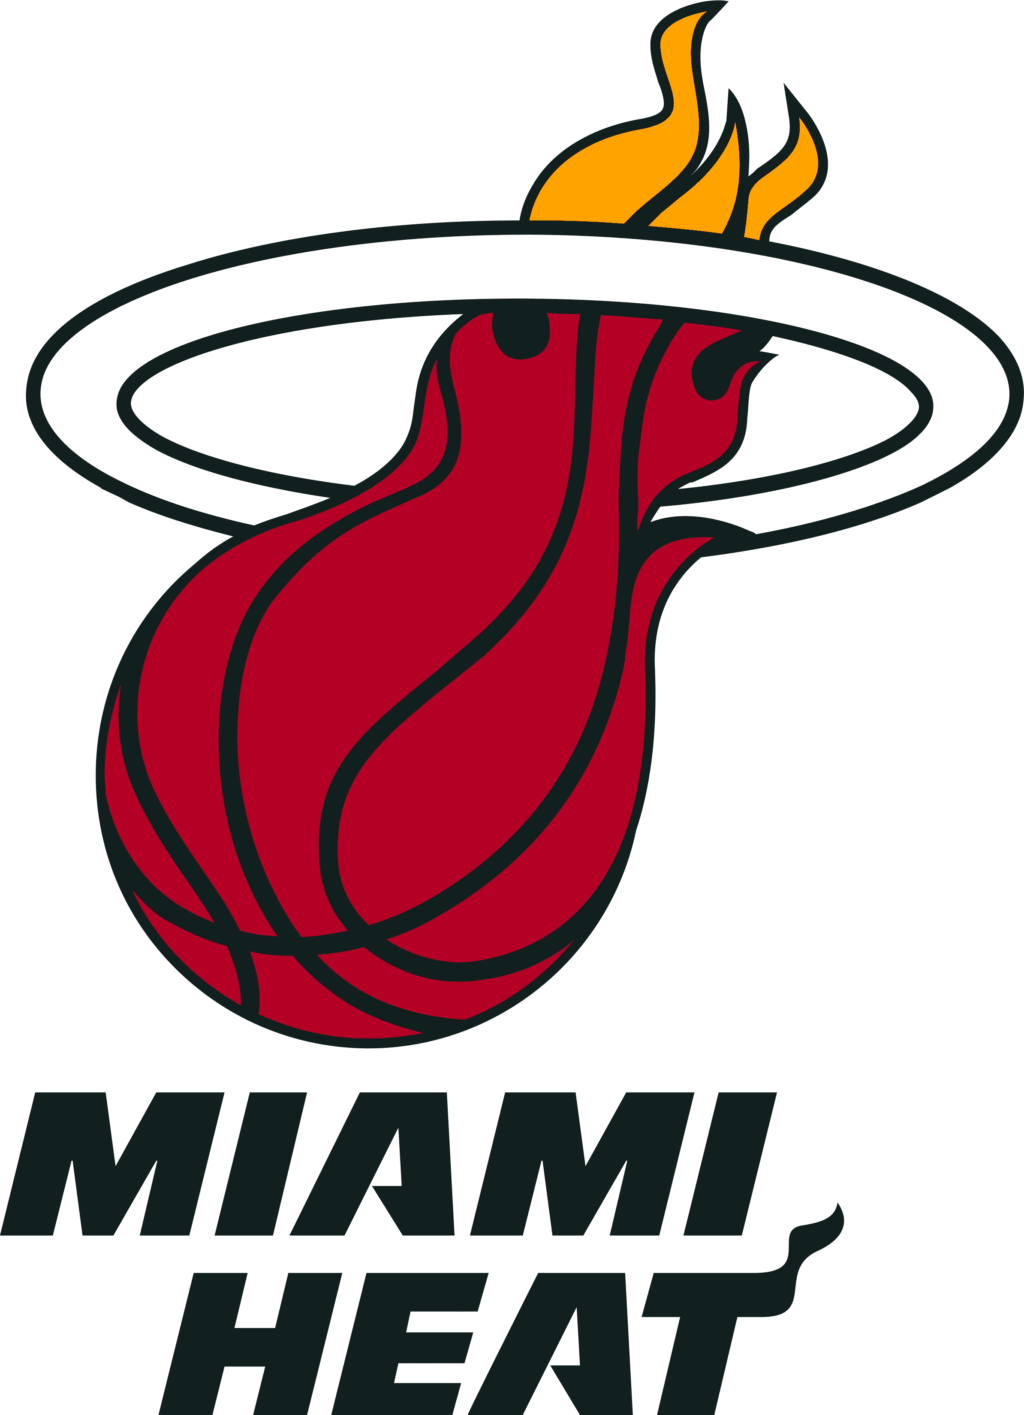 miami heat 01 NBA Miami Heat SVG, SVG Files For Silhouette, Miami Heat Files For Cricut, Miami Heat SVG, DXF, EPS, PNG Instant Download. Miami Heat SVG, SVG Files For Silhouette, Miami Heat Files For Cricut, Miami Heat SVG, DXF, EPS, PNG Instant Download.